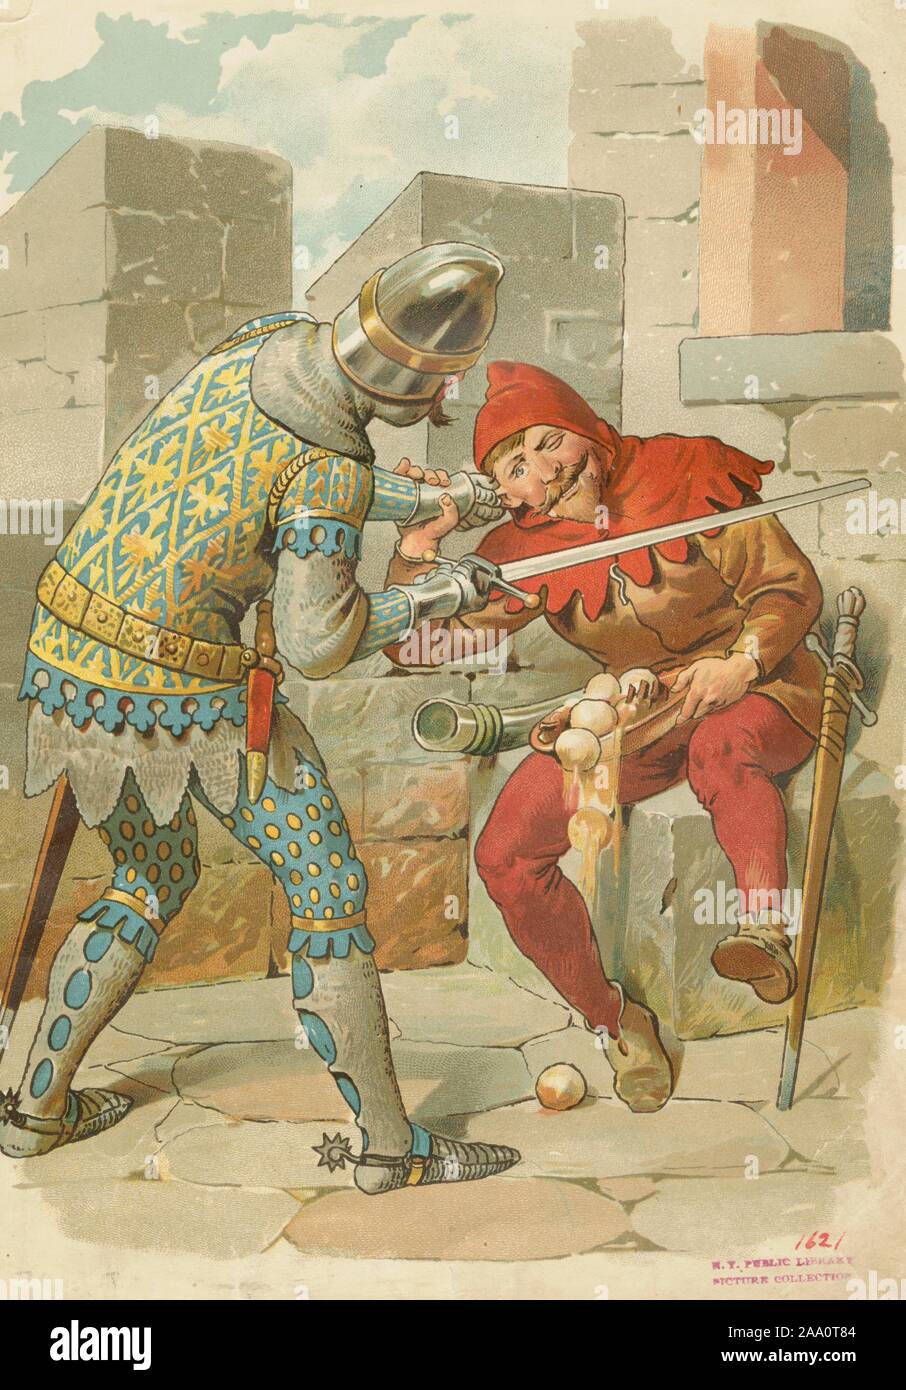 Color illustration of a scene from the book 'Till Eulenspiegels lustige Streiche' by author Georg Paysen Petersen, featuring a knight pulling Eulenspiegel's ear, illustrated by Eugen Klimsch, published by Loewe Publishing, 1904. From the New York Public Library. () Stock Photo